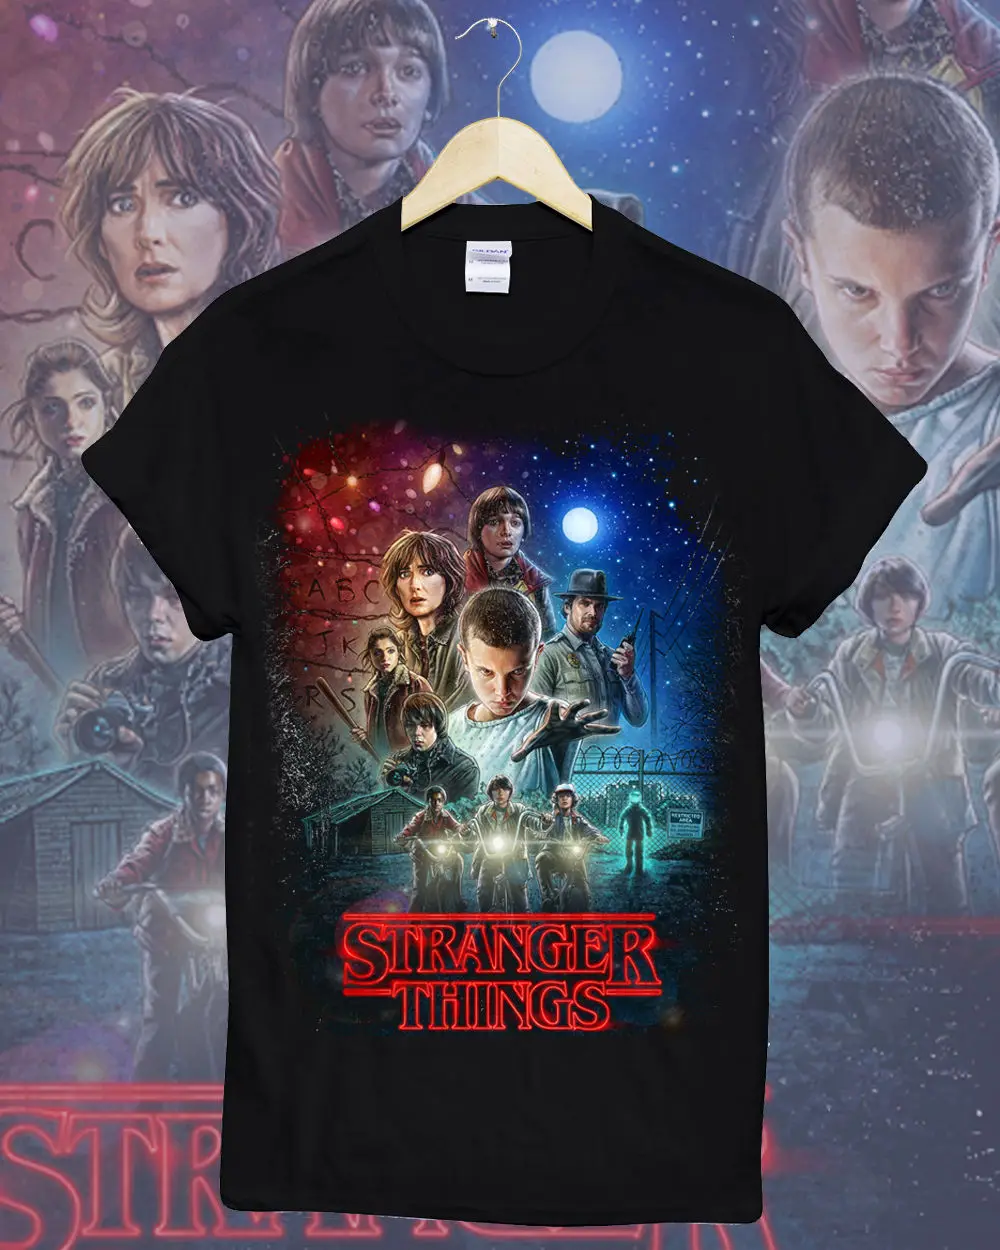 

STRANGER THINGS POSTER SEASON 1 ELEVEN NETFLIX TV SHOW UNISEX T SHIRT - BBMT230 New T Shirts Funny Tops free shipping